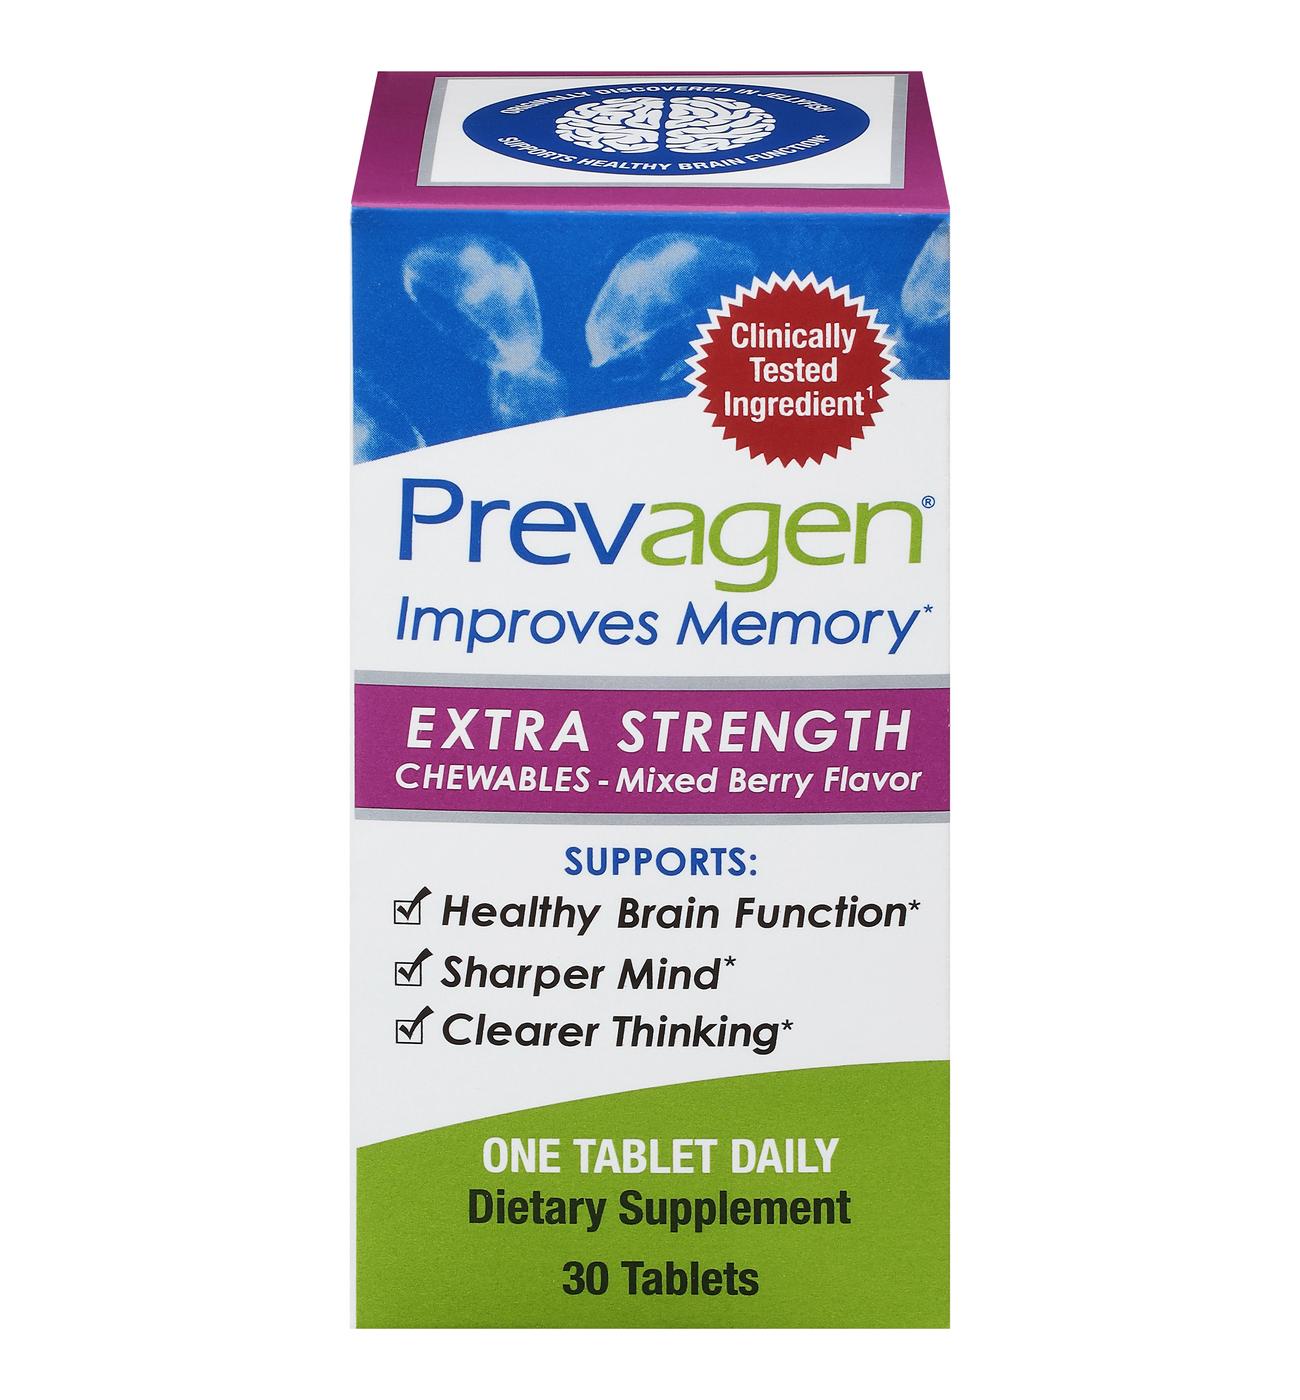 Prevagen Improves Memory Chewable Tablets - Mixed Berry; image 1 of 2